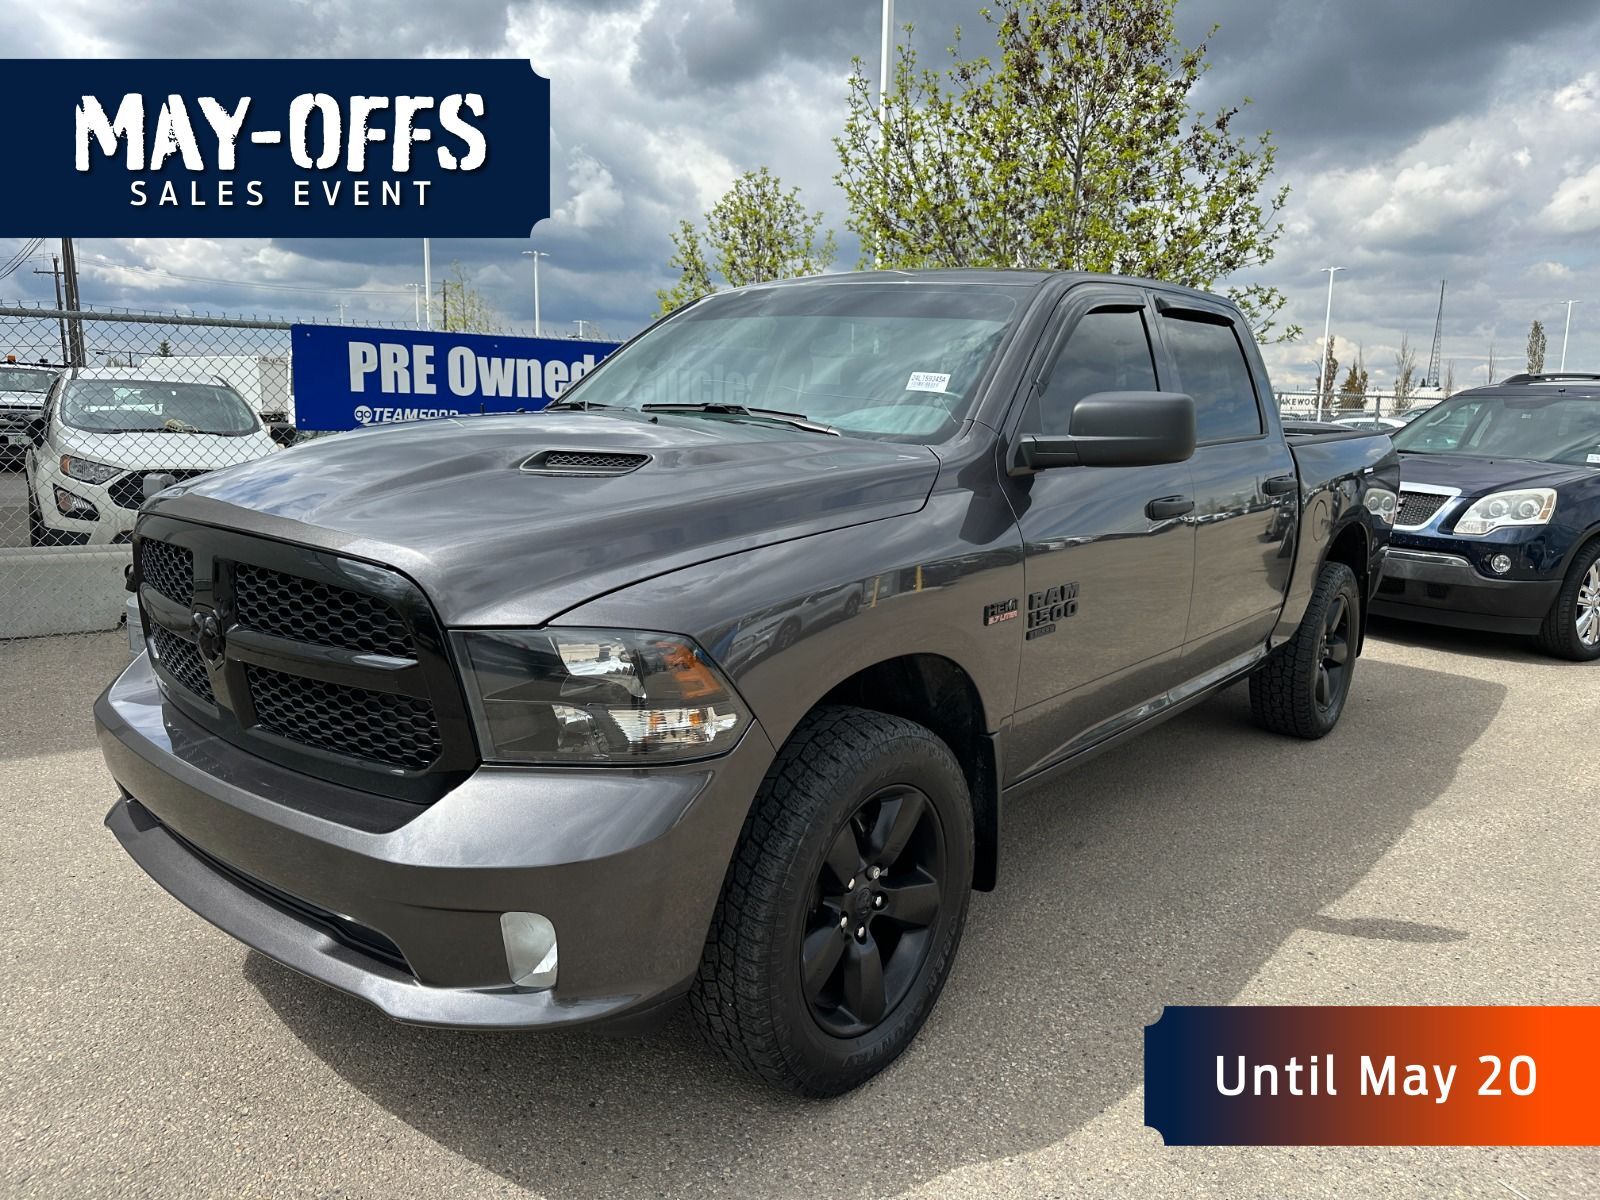 2019 Ram 1500 Classic 5.7L V8 ENG, CLASSIC EXPRESS, HEATED SEATS, REMOTE